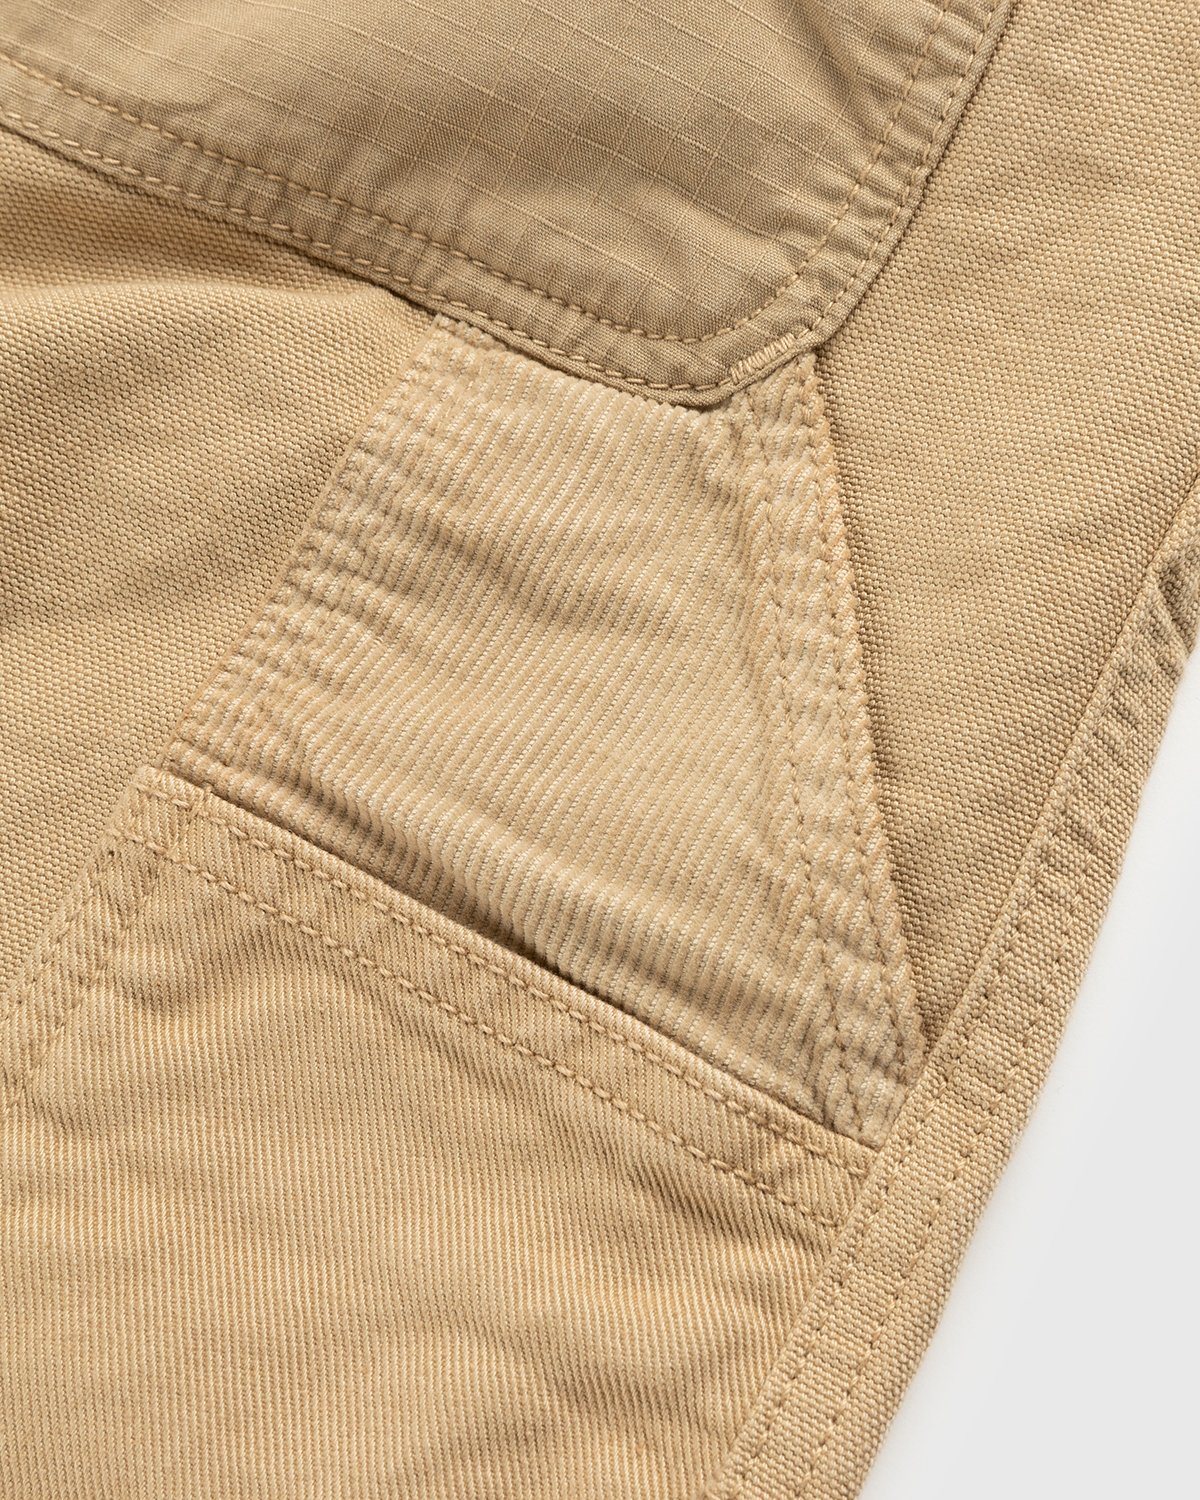 Carhartt WIP - Medley Pant Dusty Hamilton Brown Garment Dyed - Clothing - Brown - Image 4